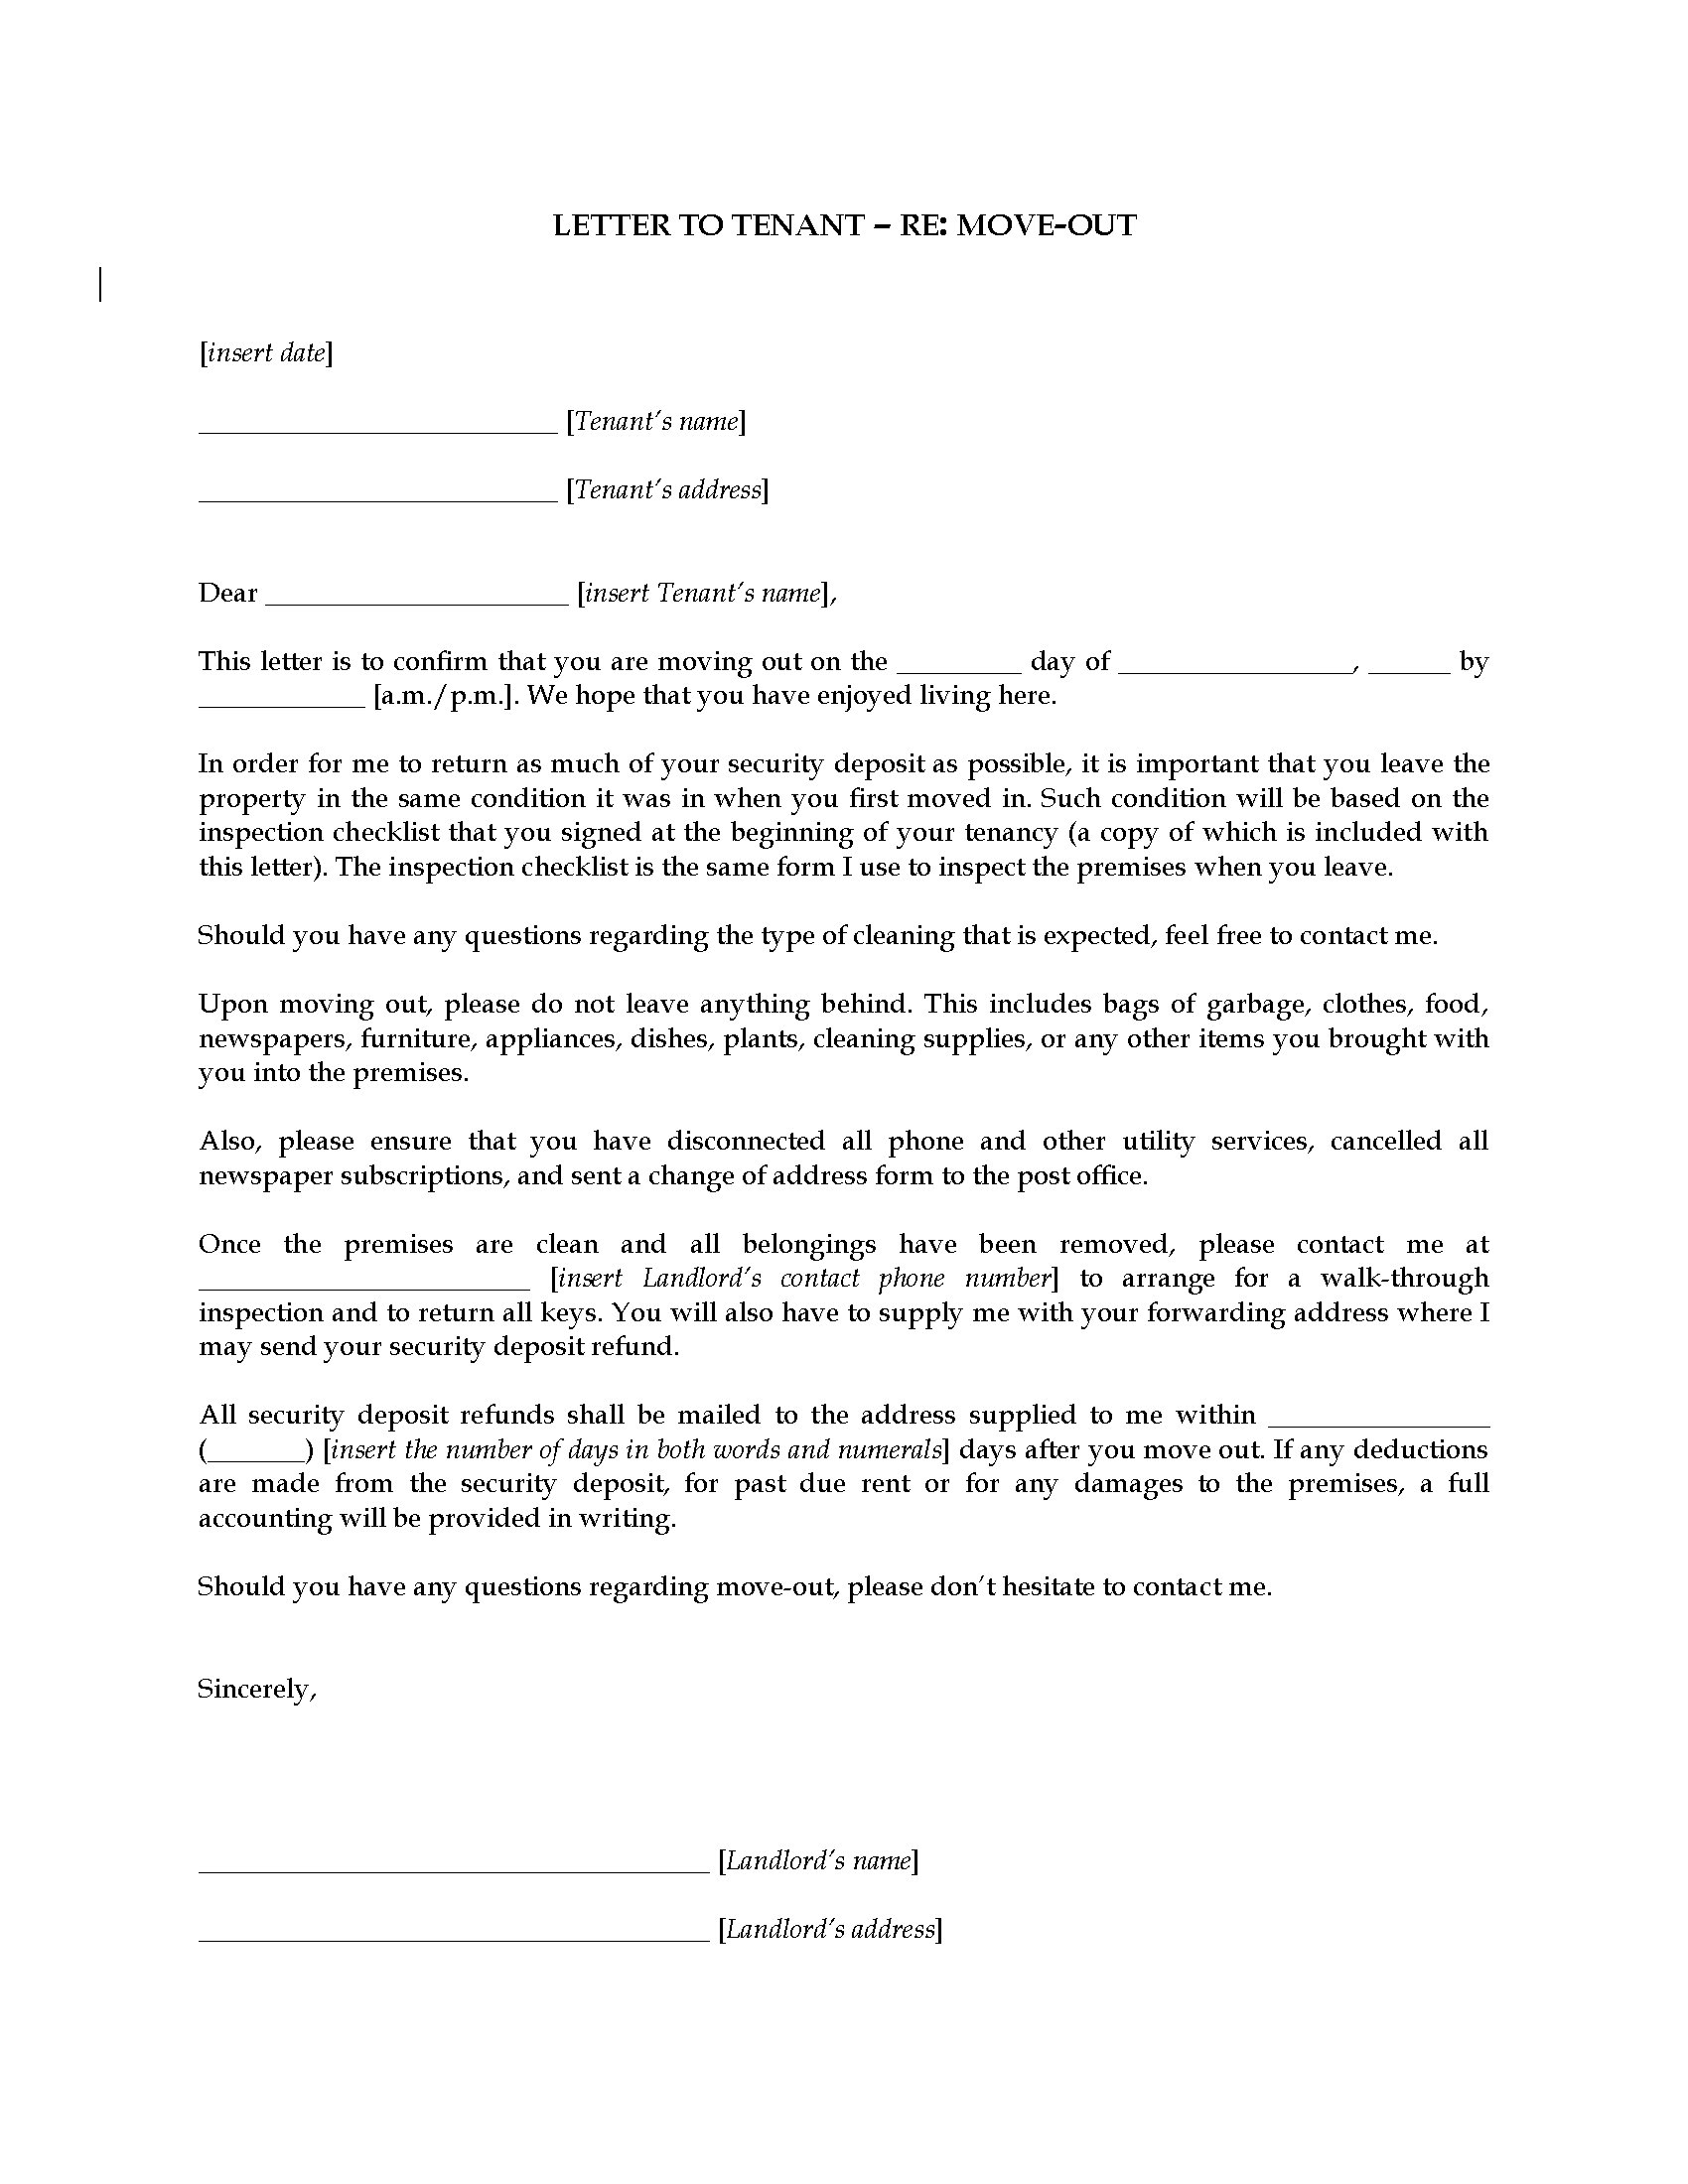 Landlord Letter to Tenant re Moving Out Legal Forms and Business